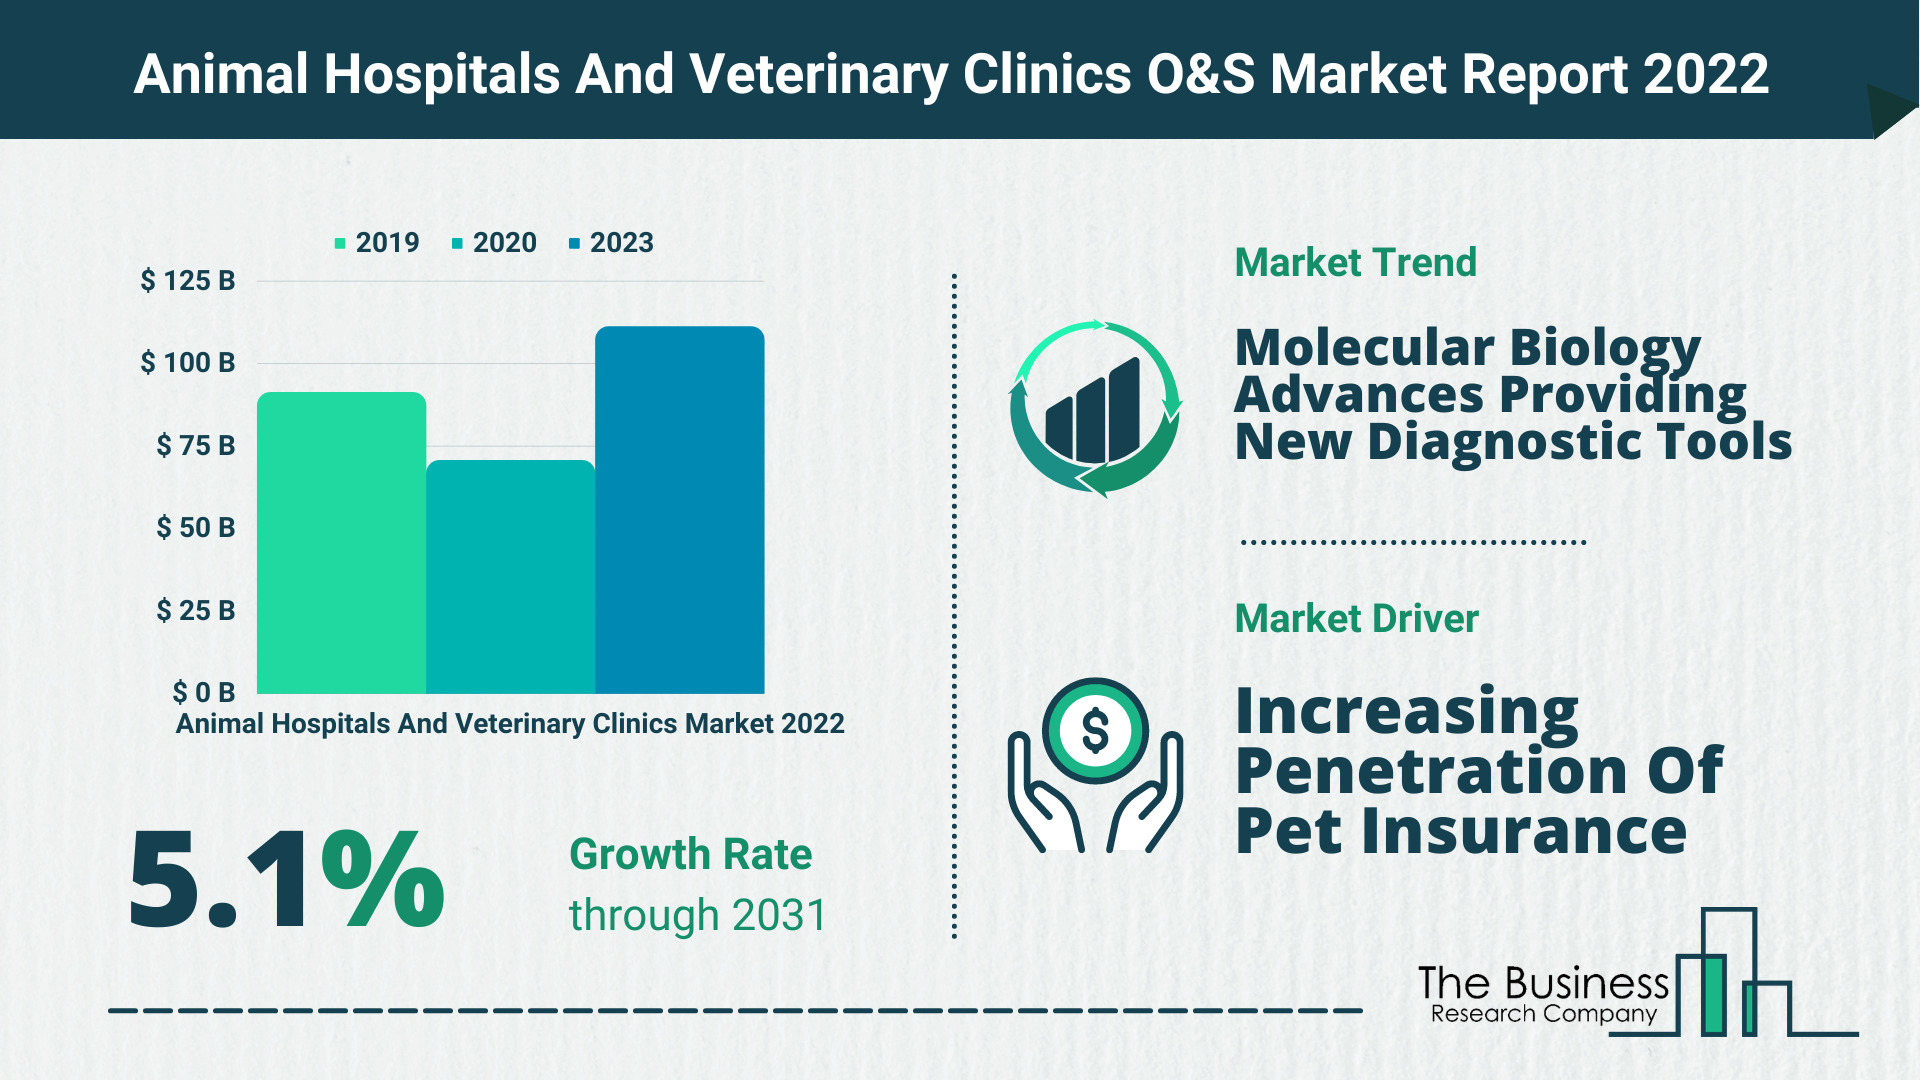 The Animal Hospitals And Veterinary Clinics Market Forecast Until 2030 – Opportunities And Strategies